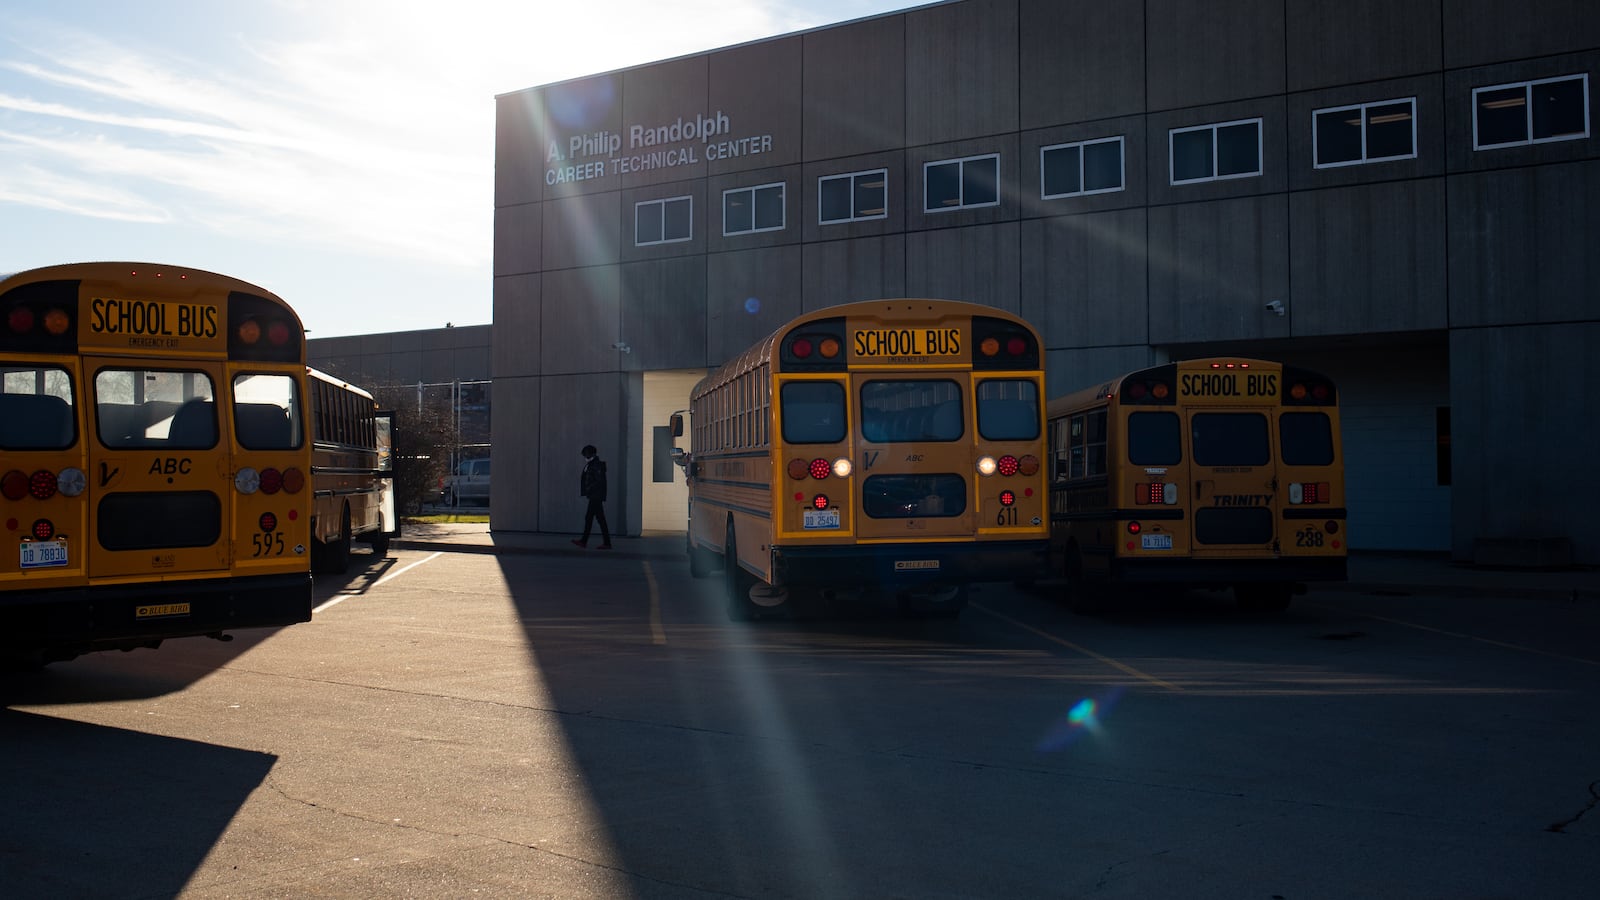 School buses pick up students at the end of the day at Randolph Career and Technical Education in Detroit, Michigan, U.S.,